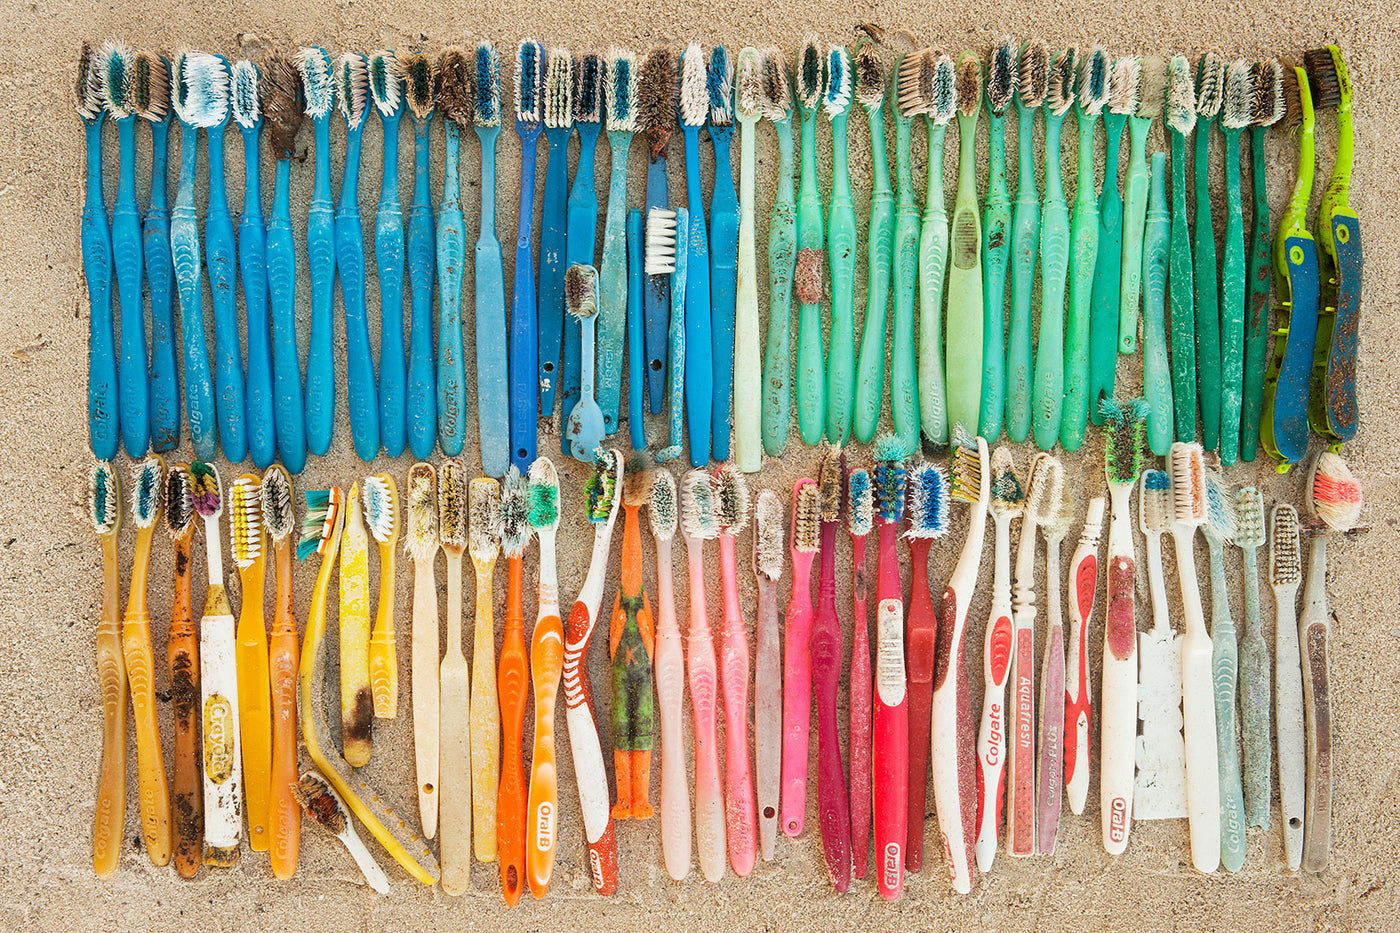 Discarded disposable toothbrushes on a beach